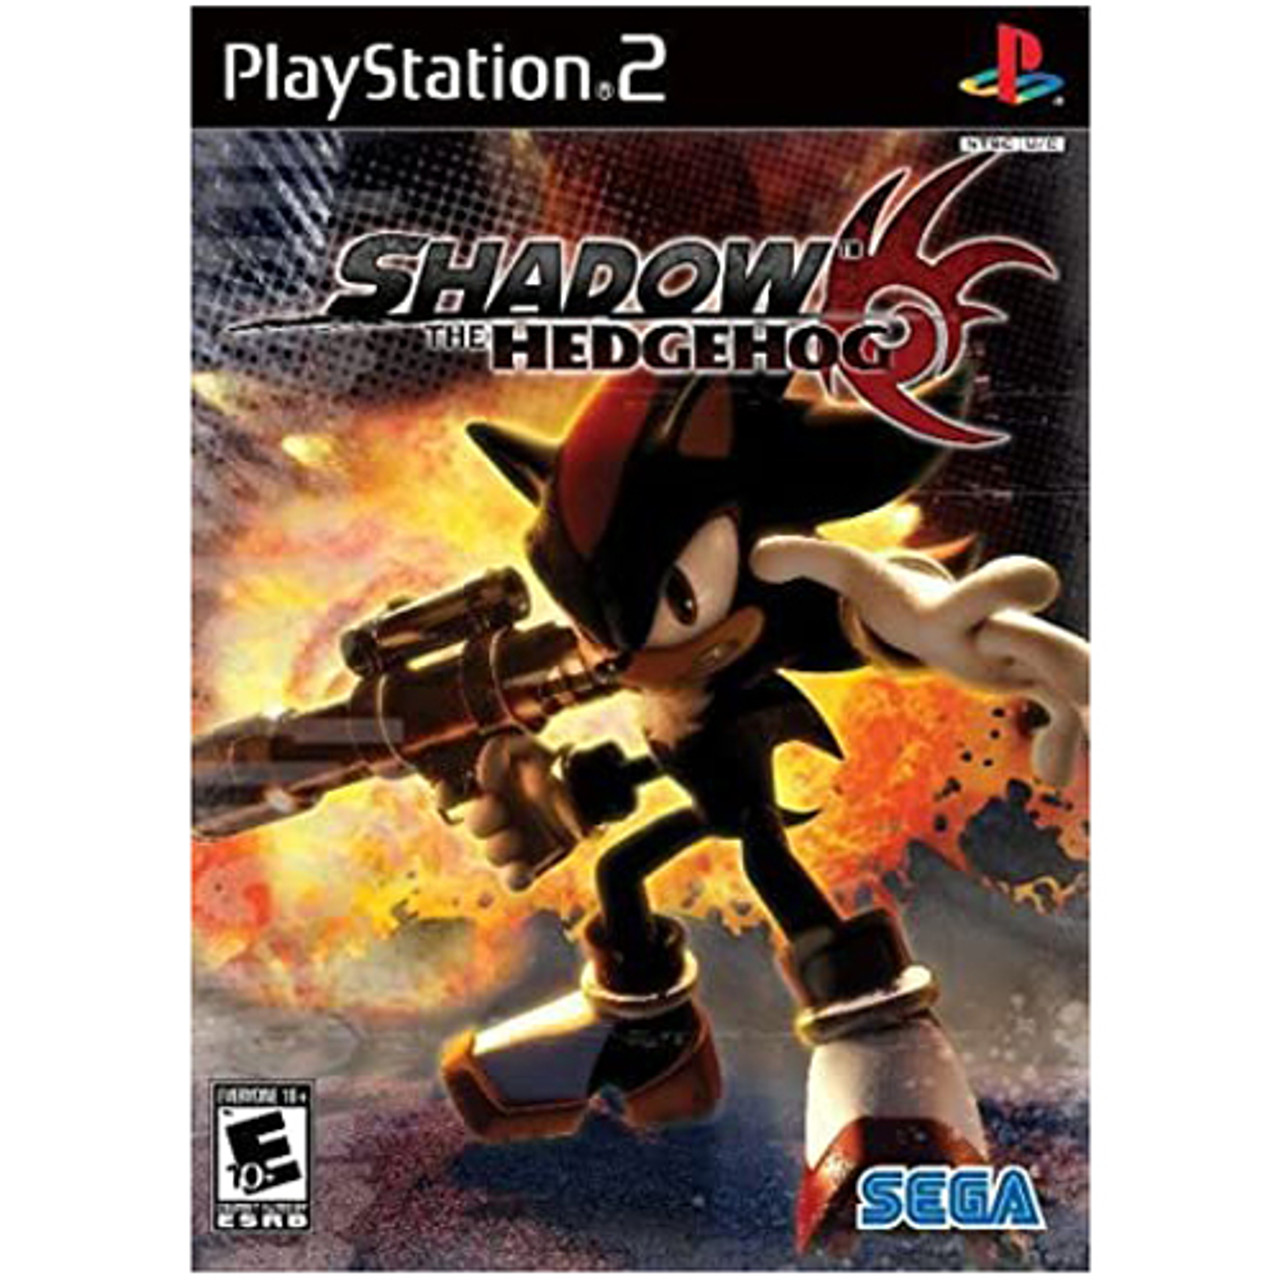 Shadow The Hedgehog PS2 CIB Complete Tested & Working 10086630879